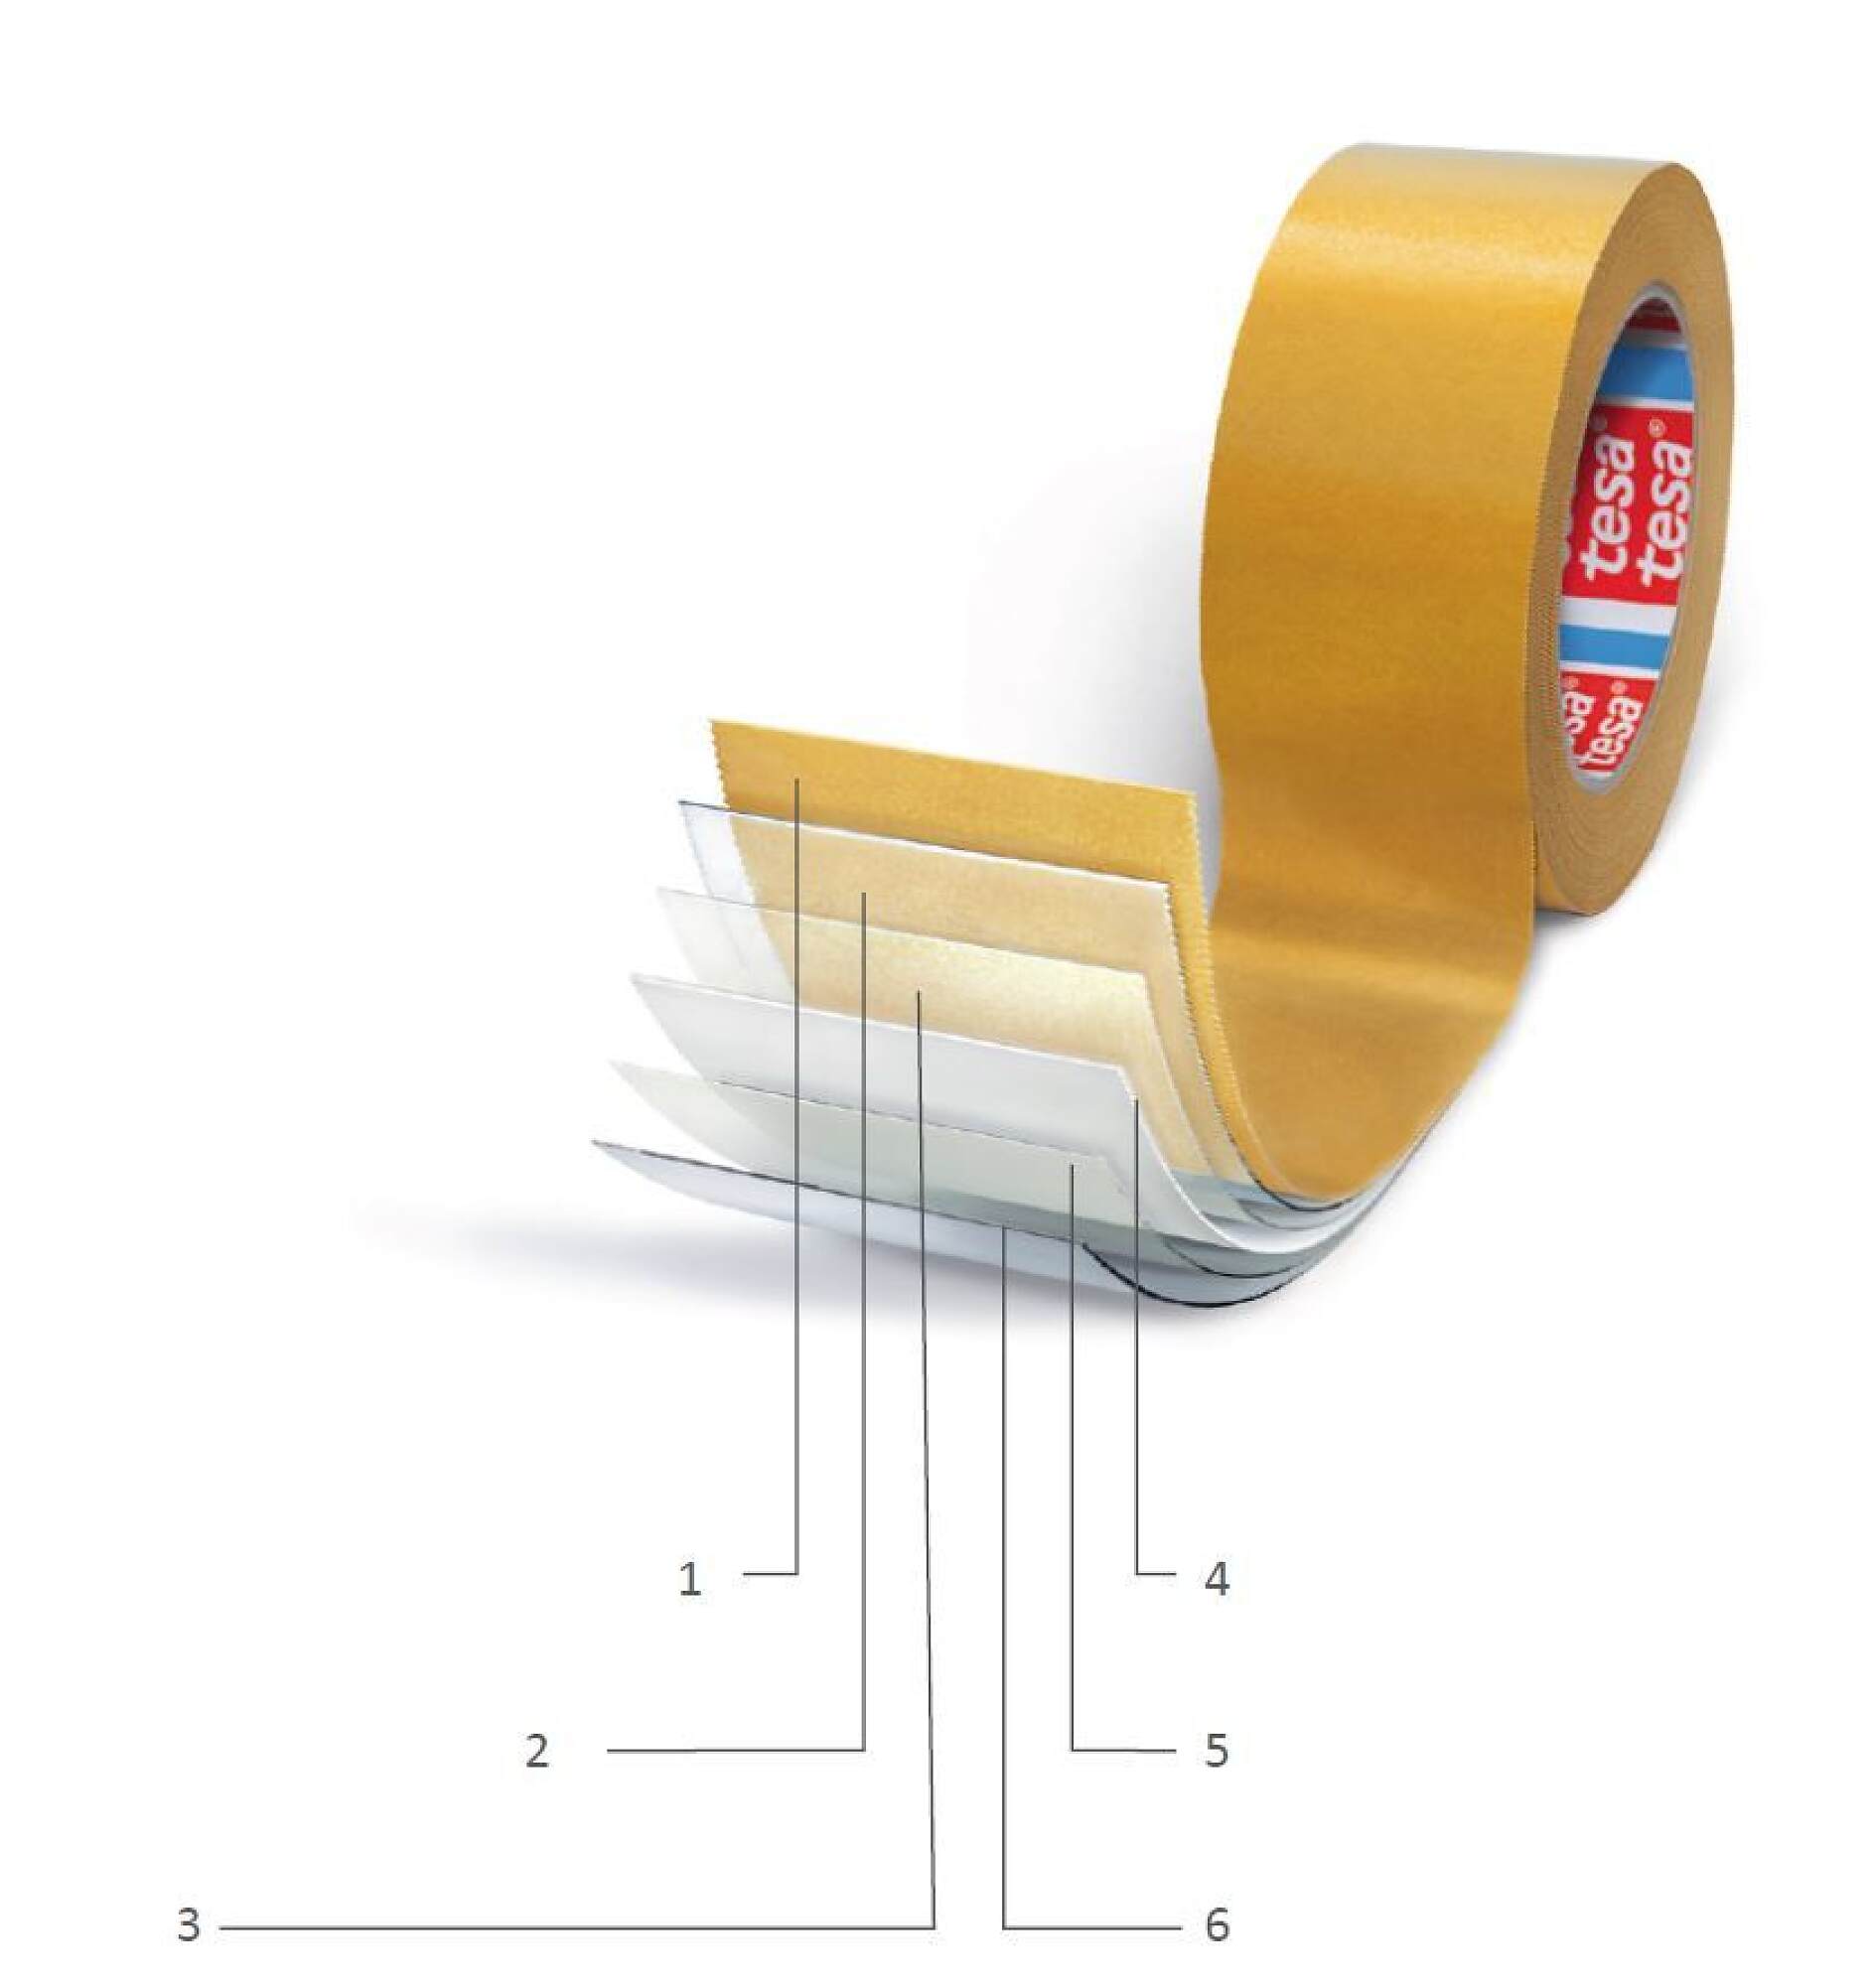 Double-coated Tape with Excellent Adhesion to Rough Surfaces, Such